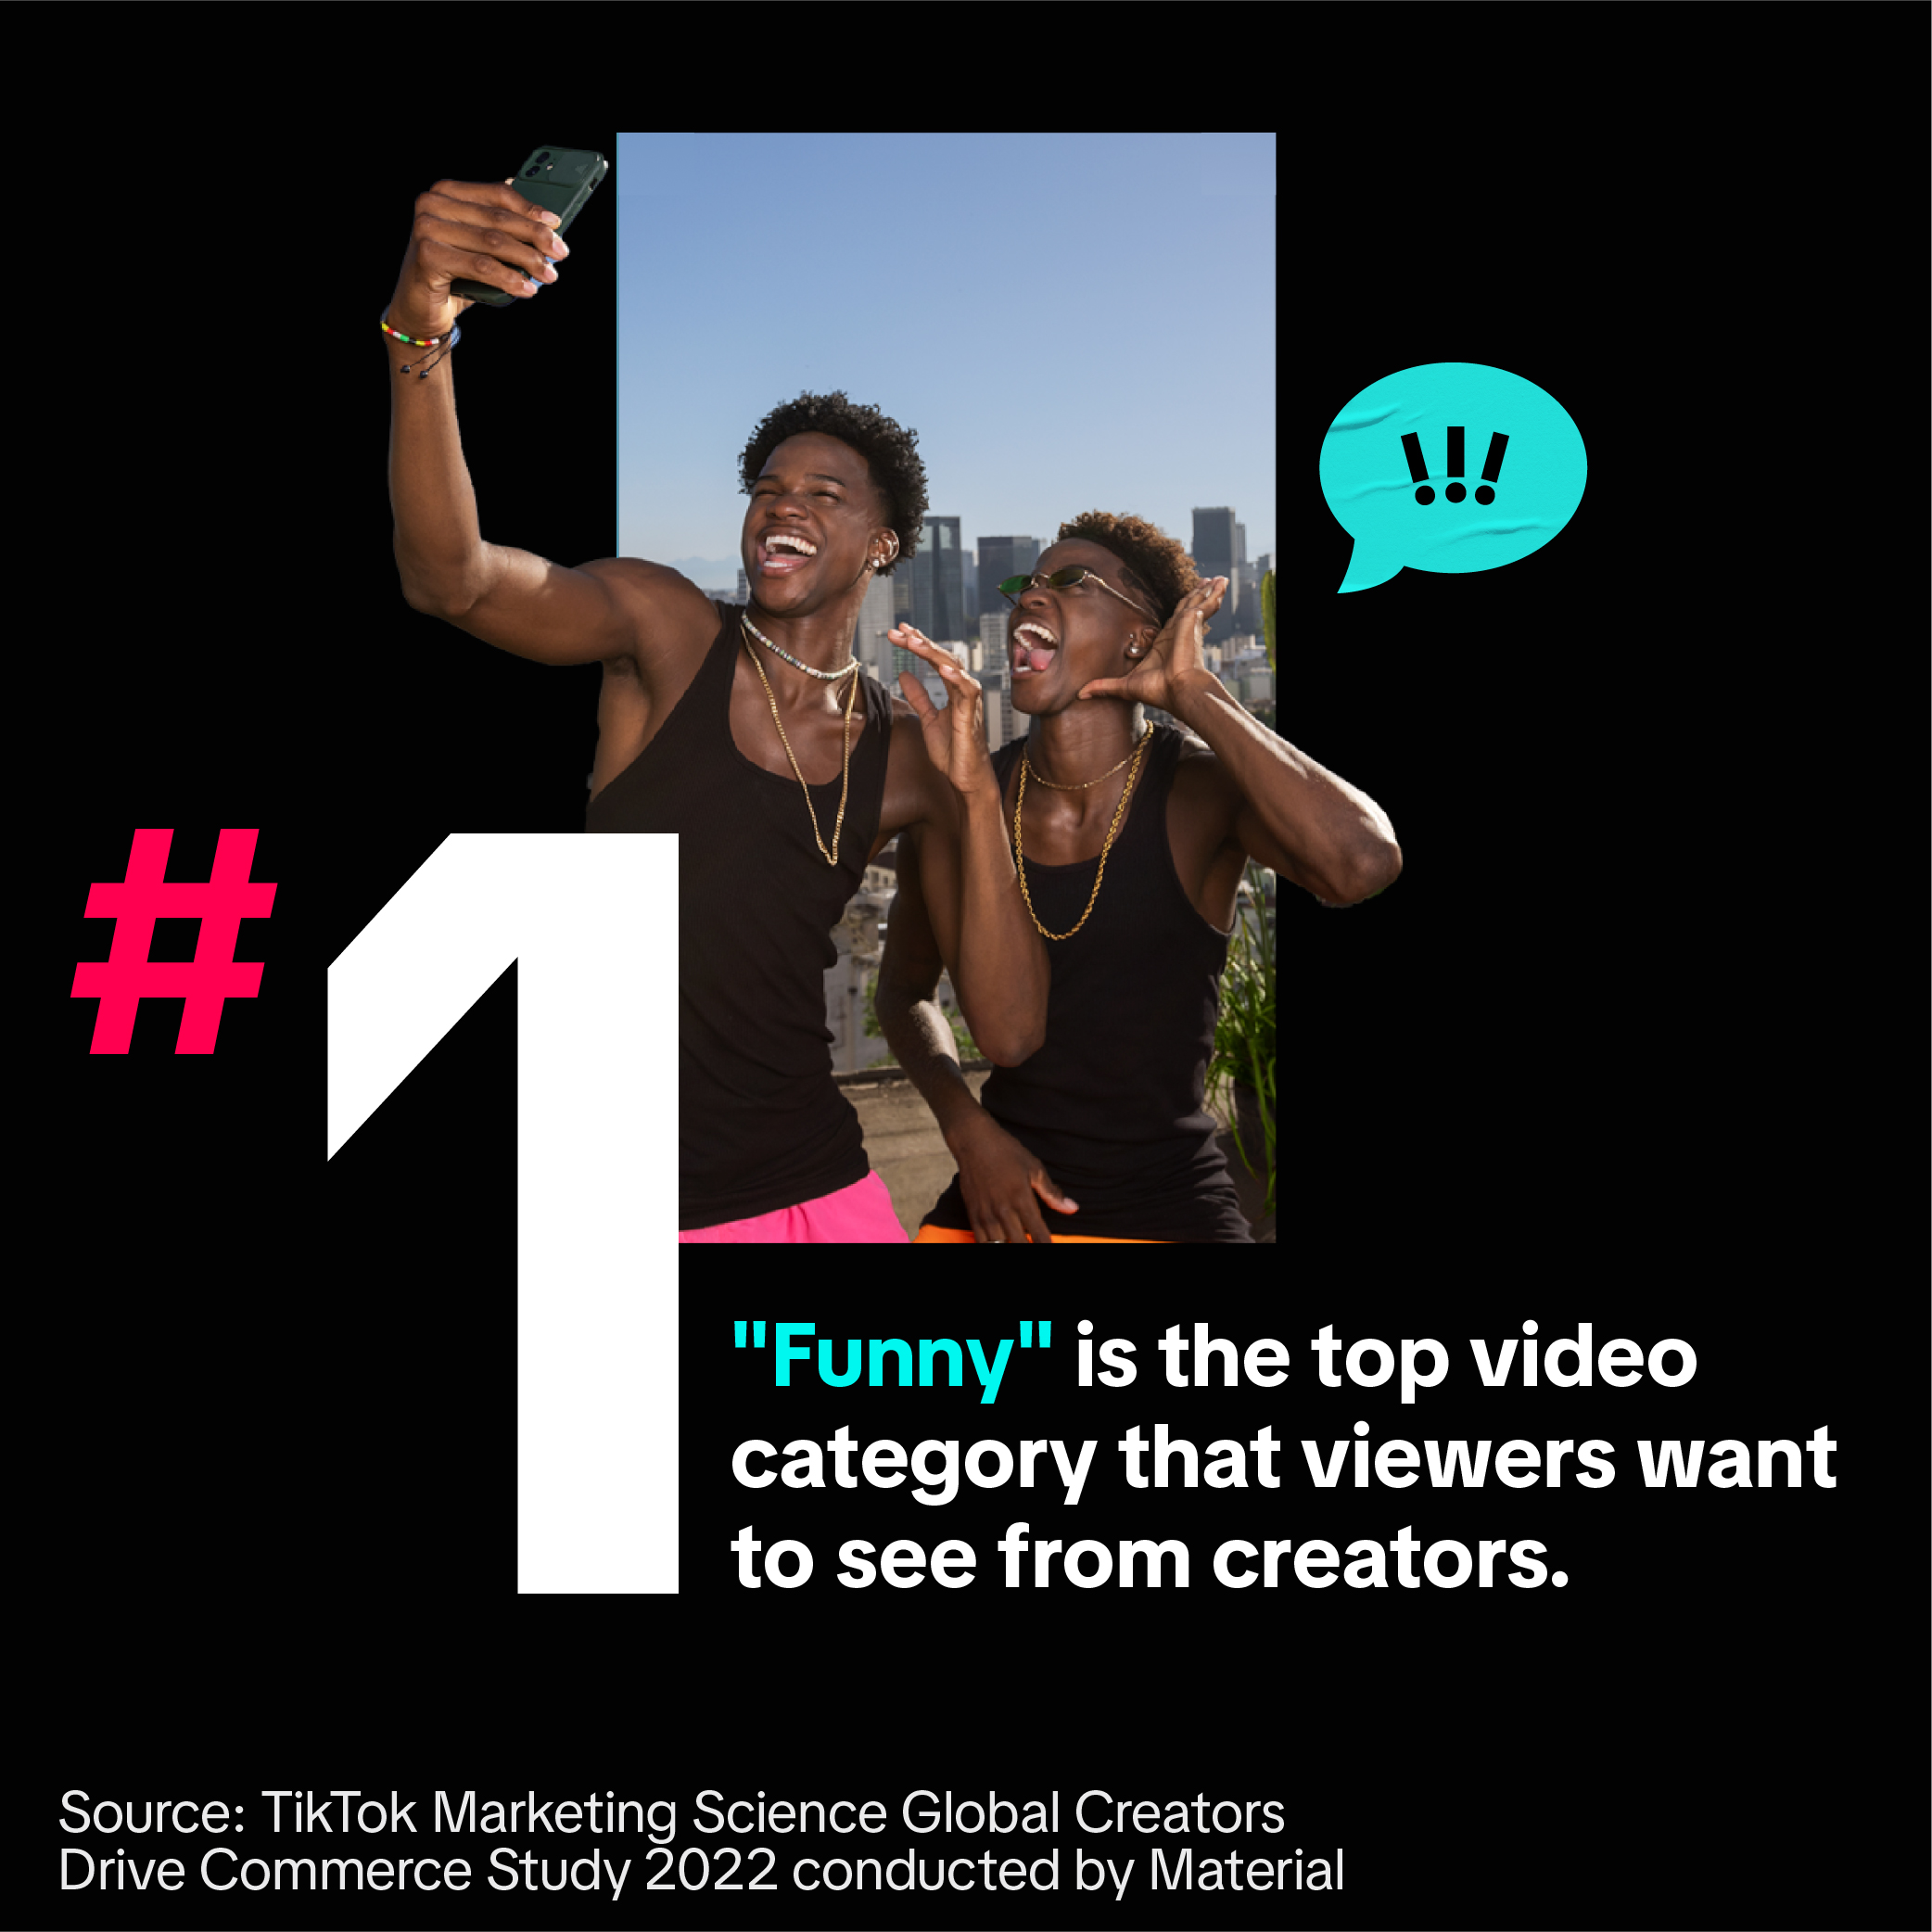 "Funny" is the top video category that viewers want to see from creators